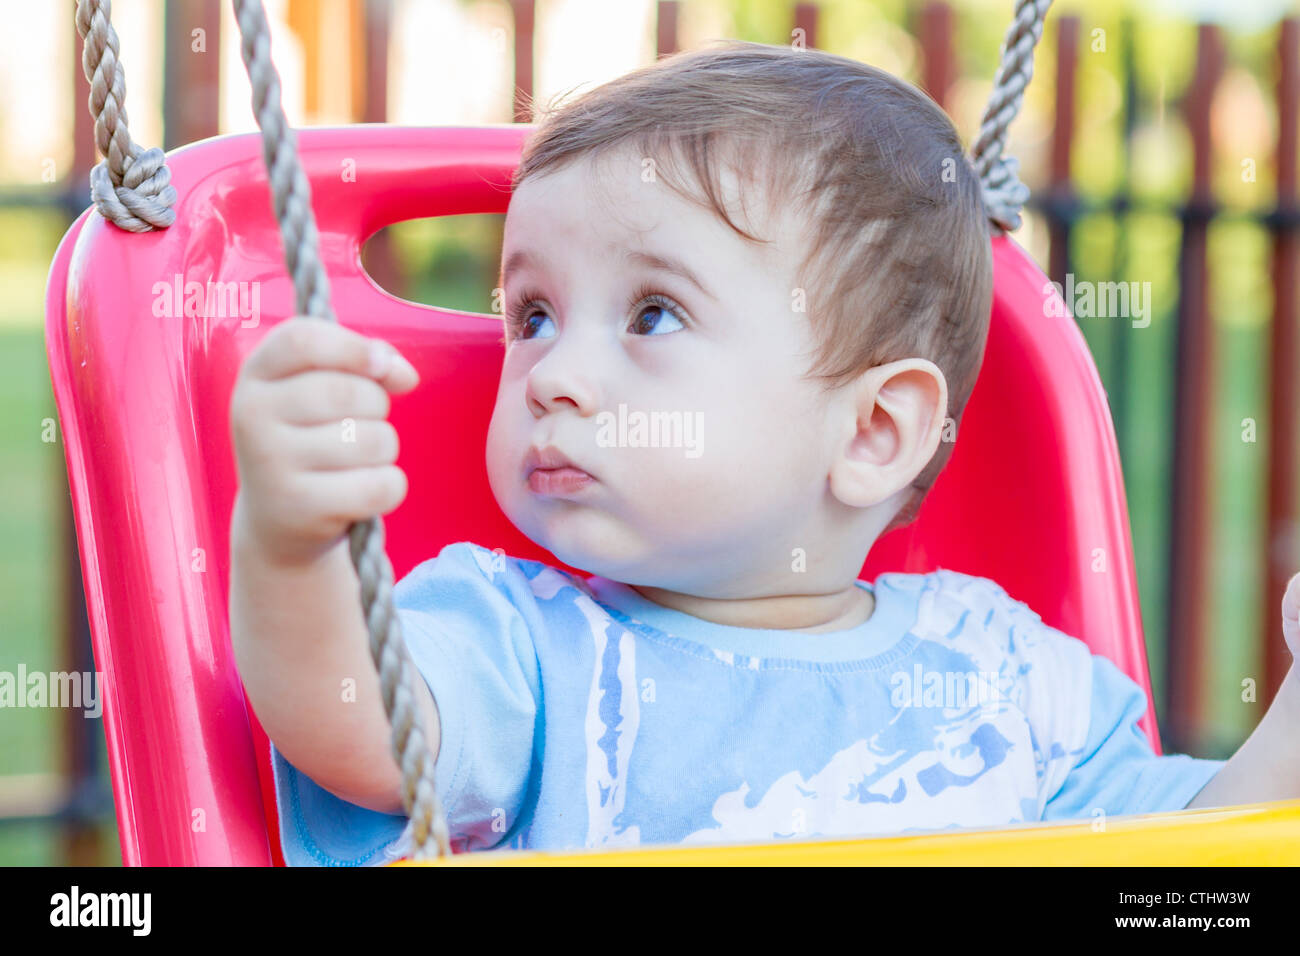 close-up of 9-month old baby boy in a swing outdoors Stock Photo